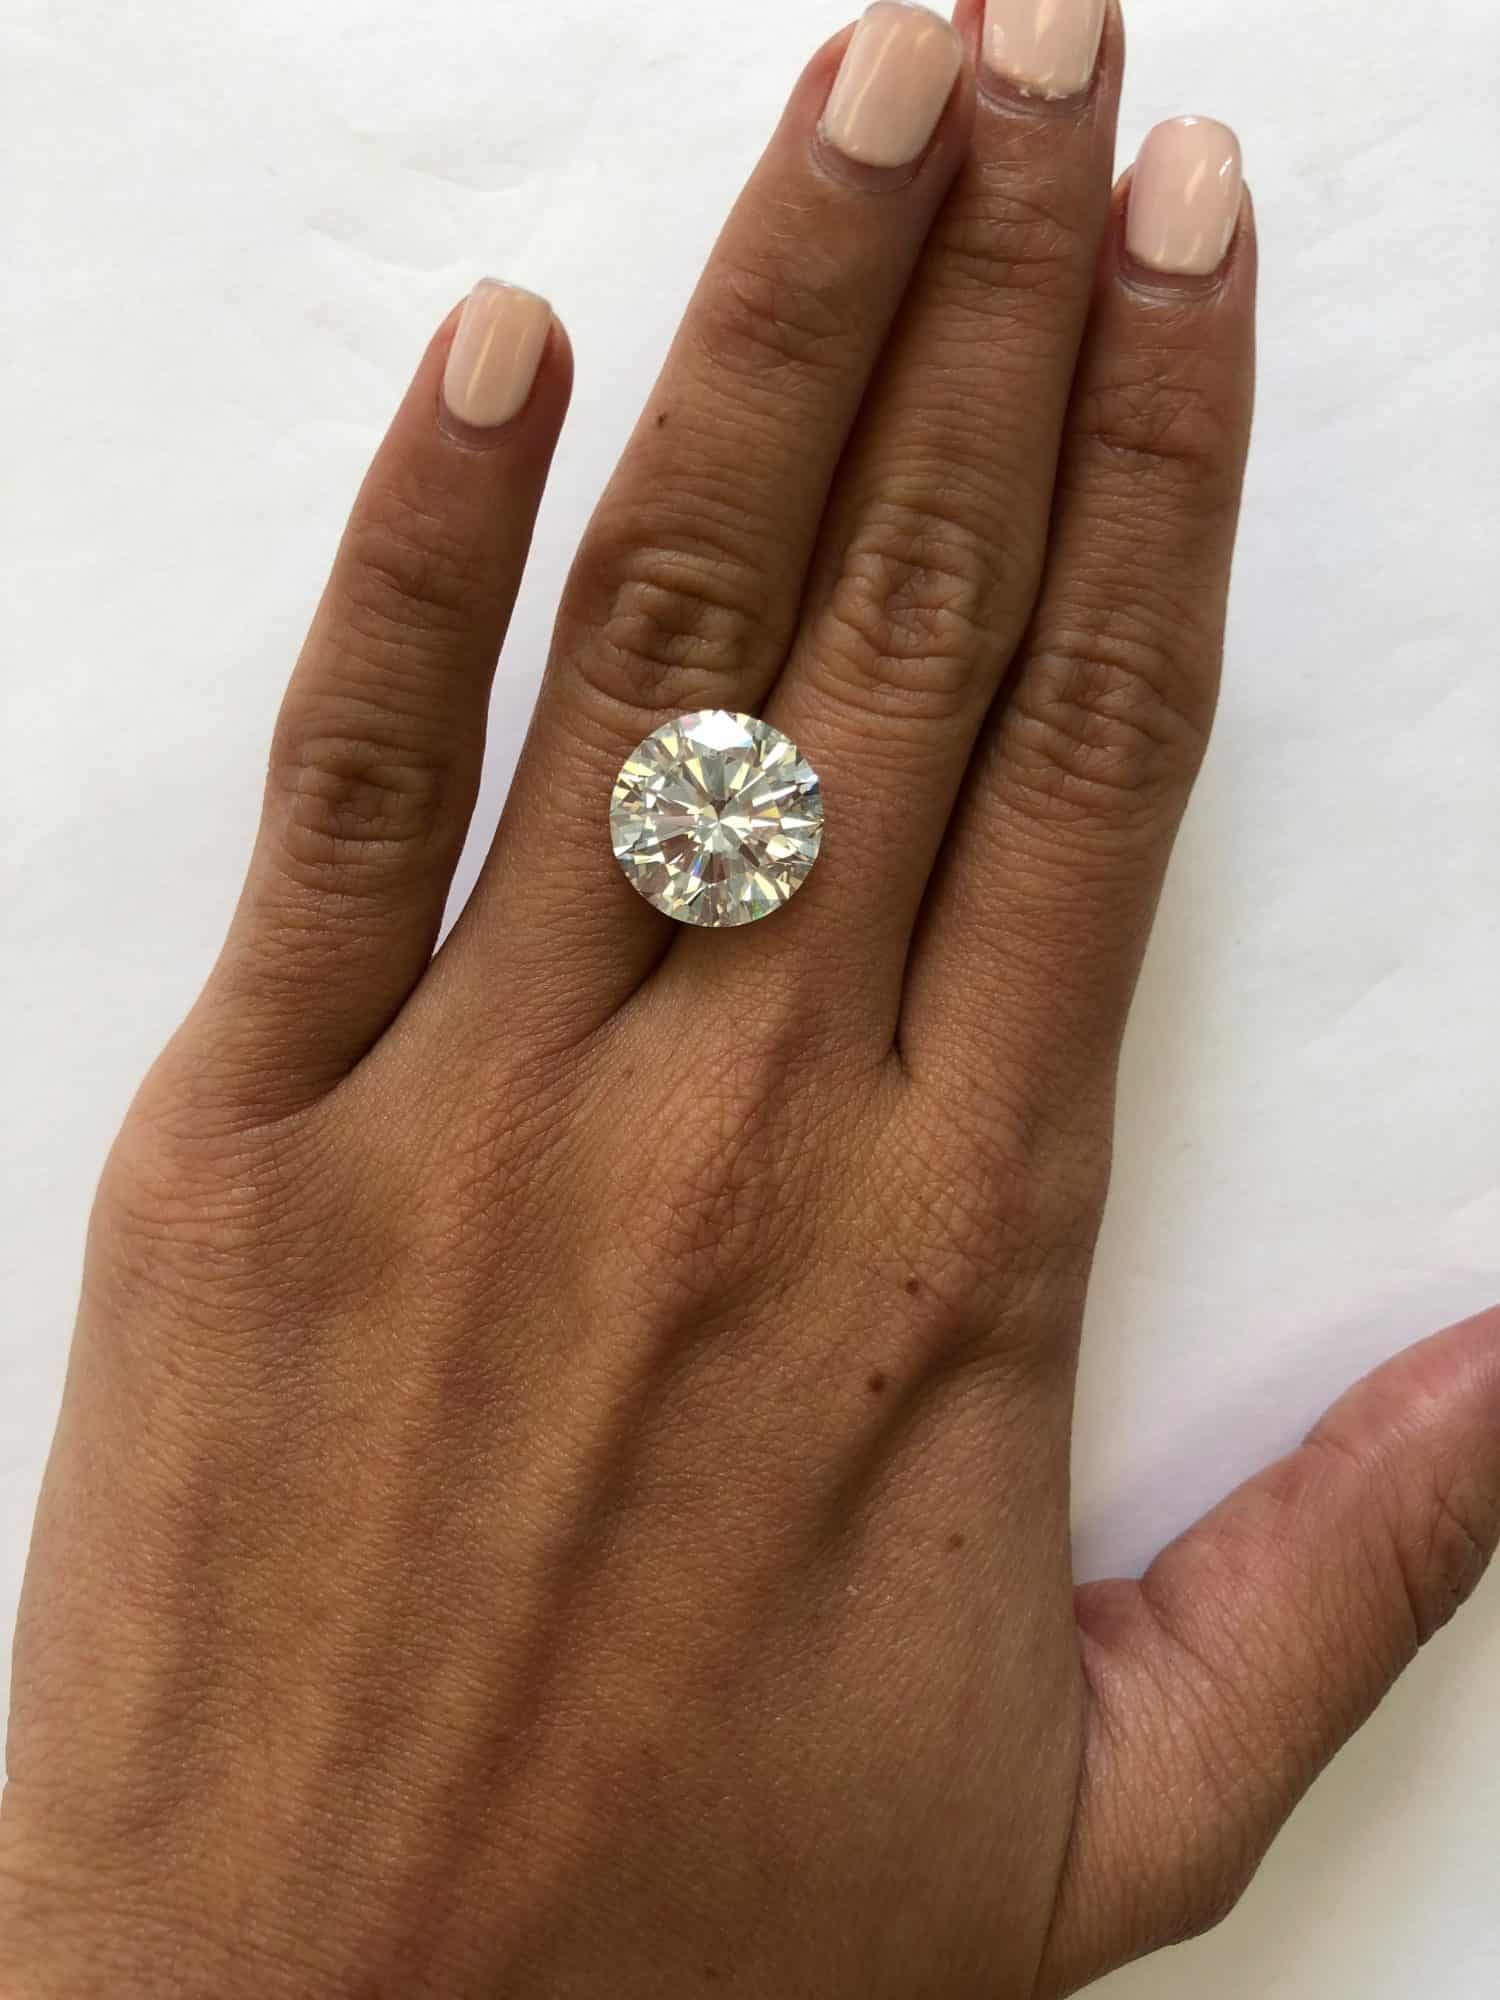 How Clarity Impacts the Price of a 9 Carat Diamond